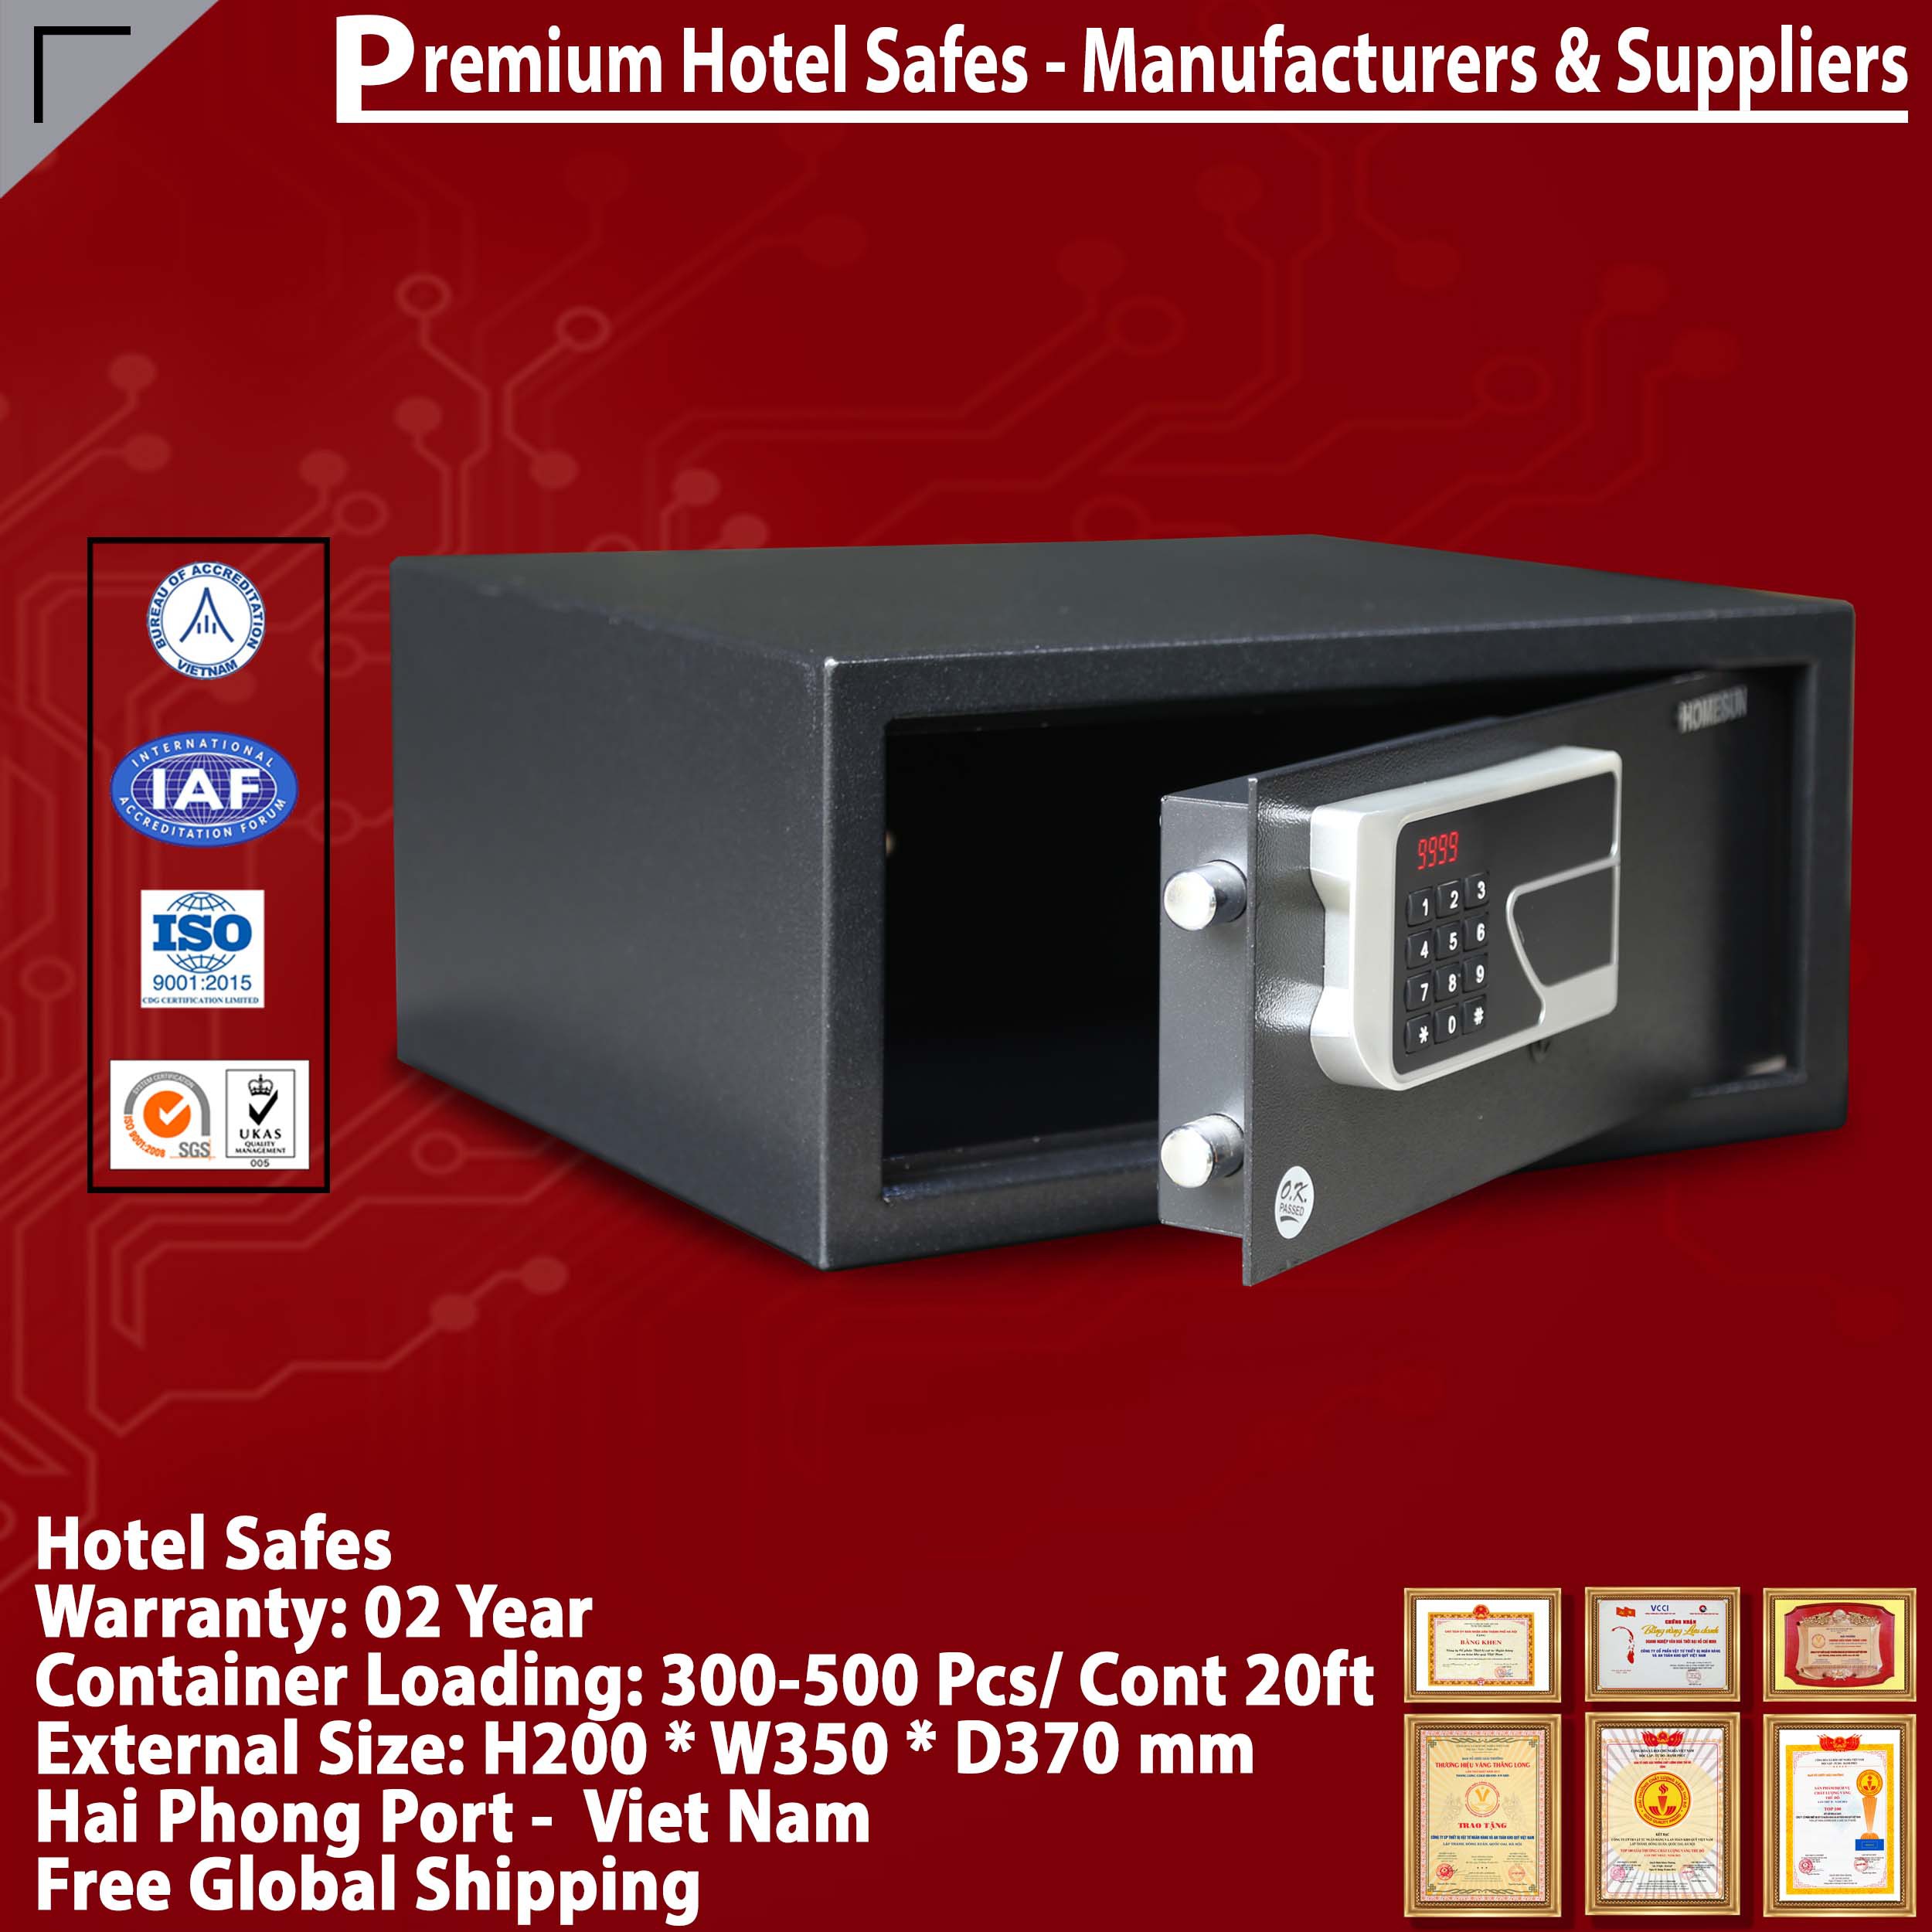 Best Sellers In Hotel Safes High Quality Price Ratio‎ For Sale